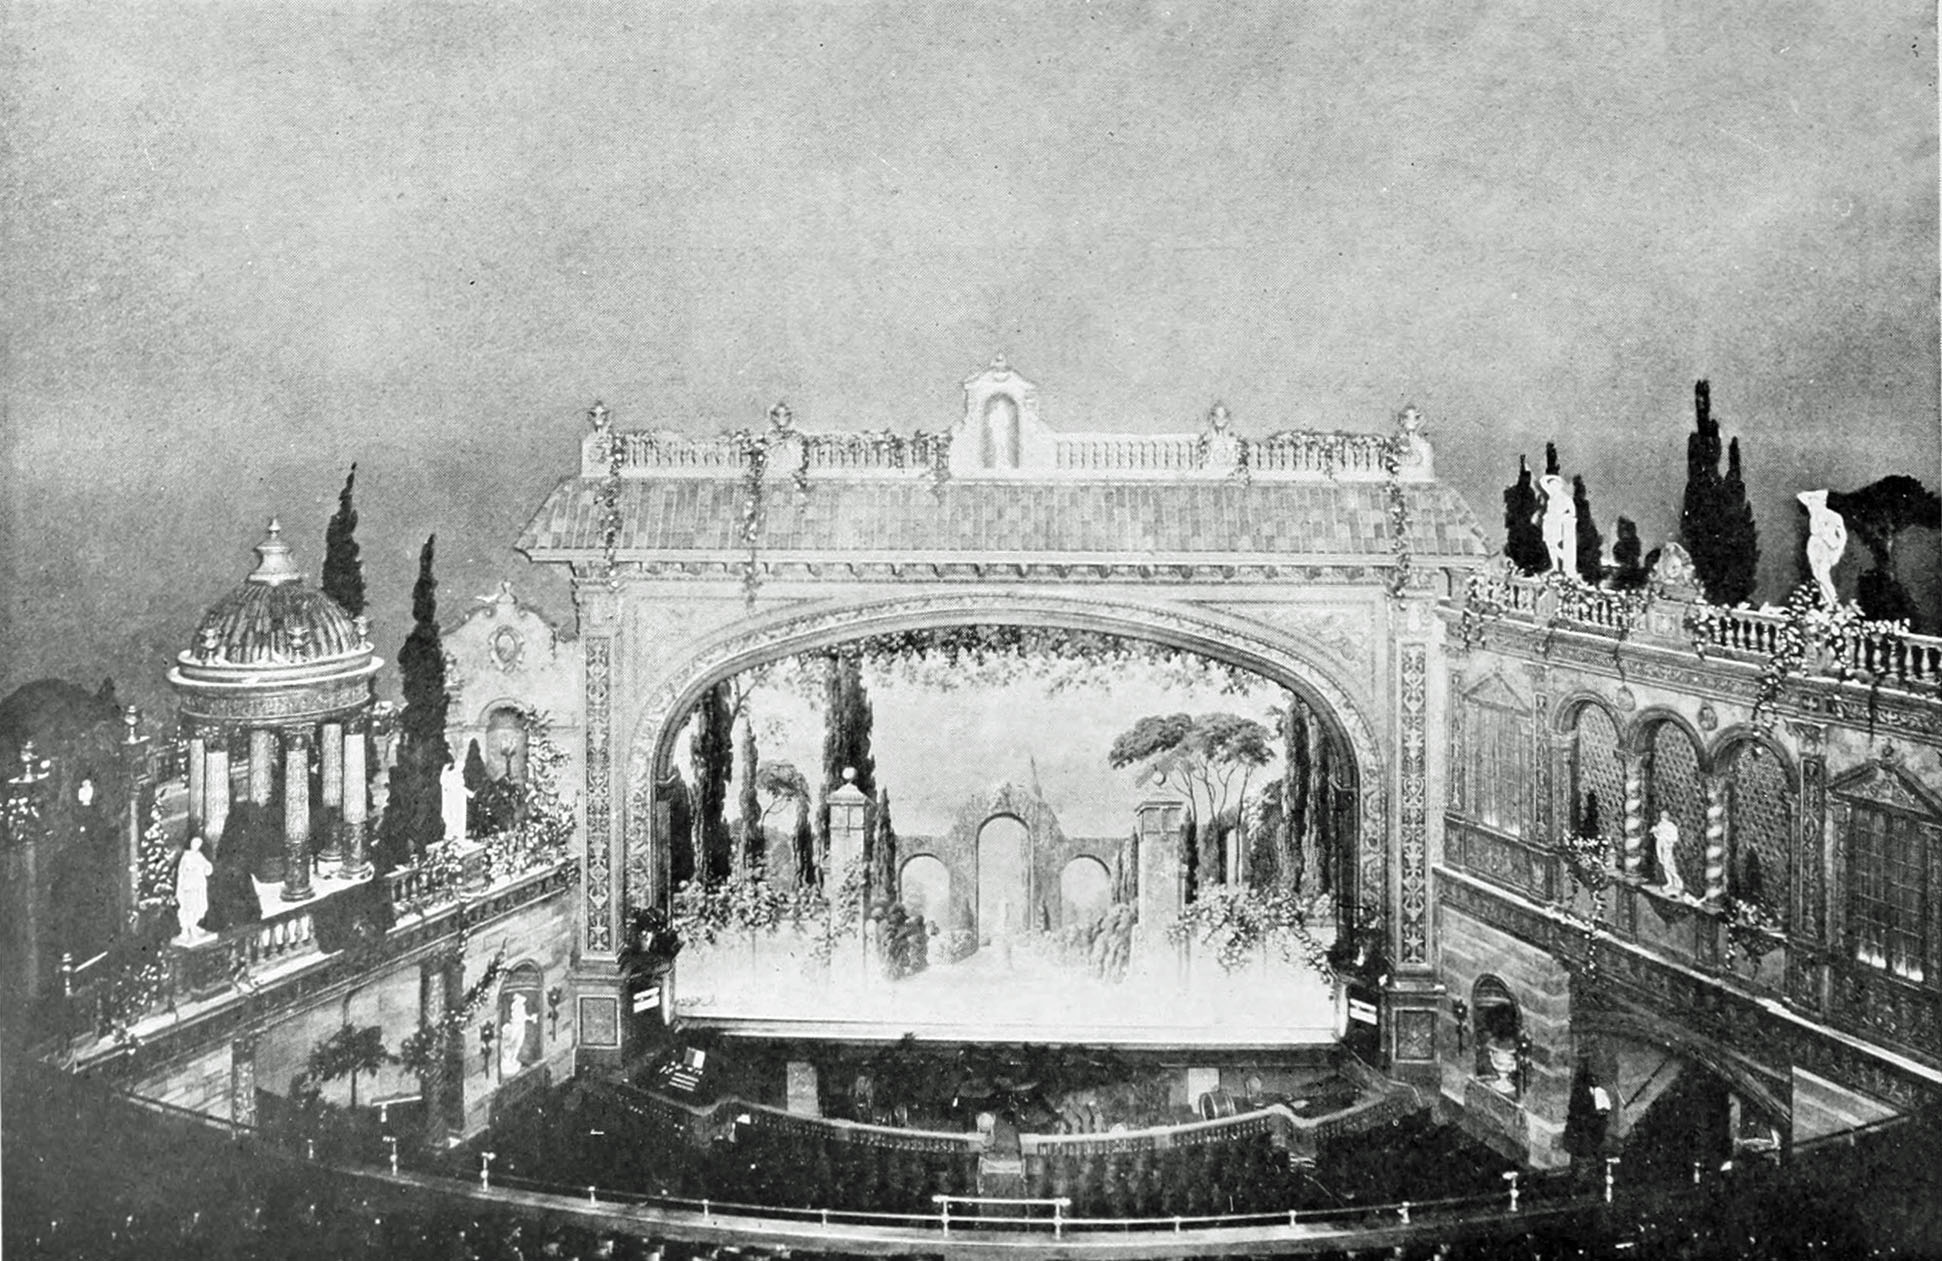 Full view of stage, side walls and ceiling of the Riviera Theatre, Detroit. The proscenium is a tile-covered triumphal arch.